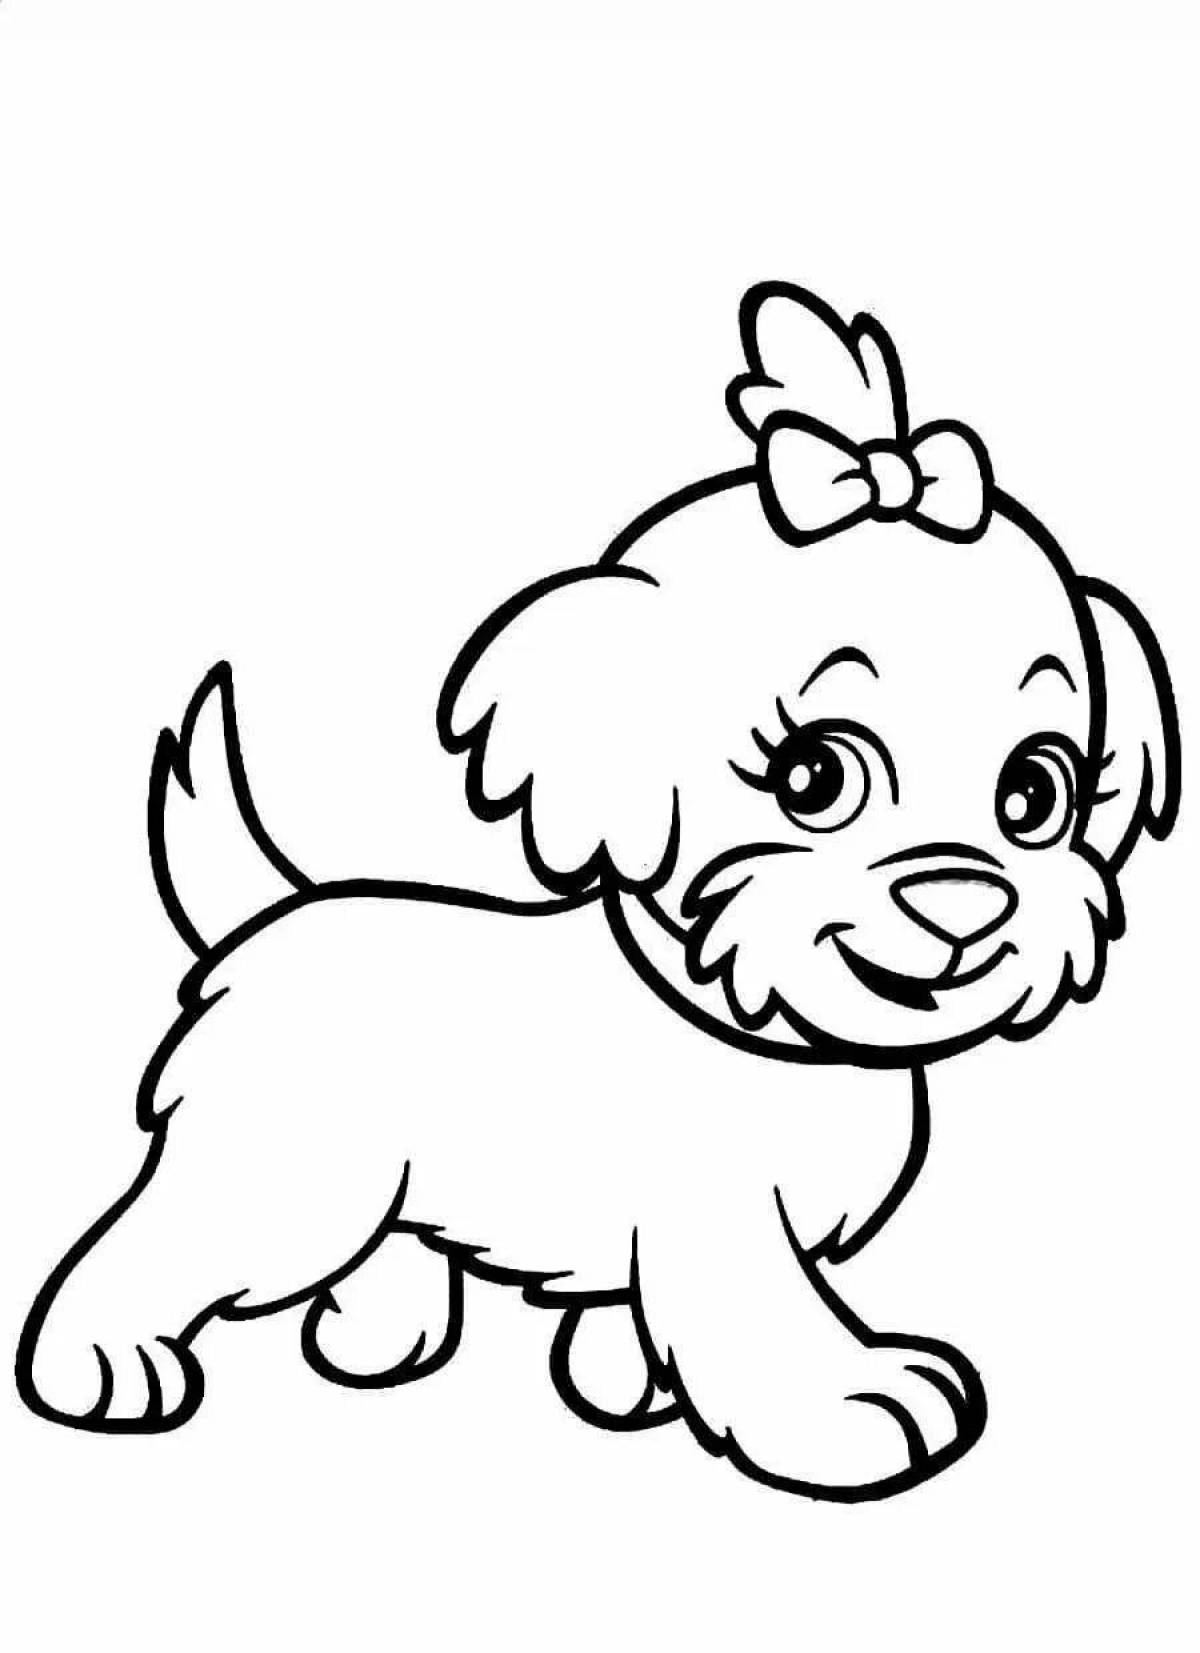 Amazing dog coloring book for kids 7-8 years old